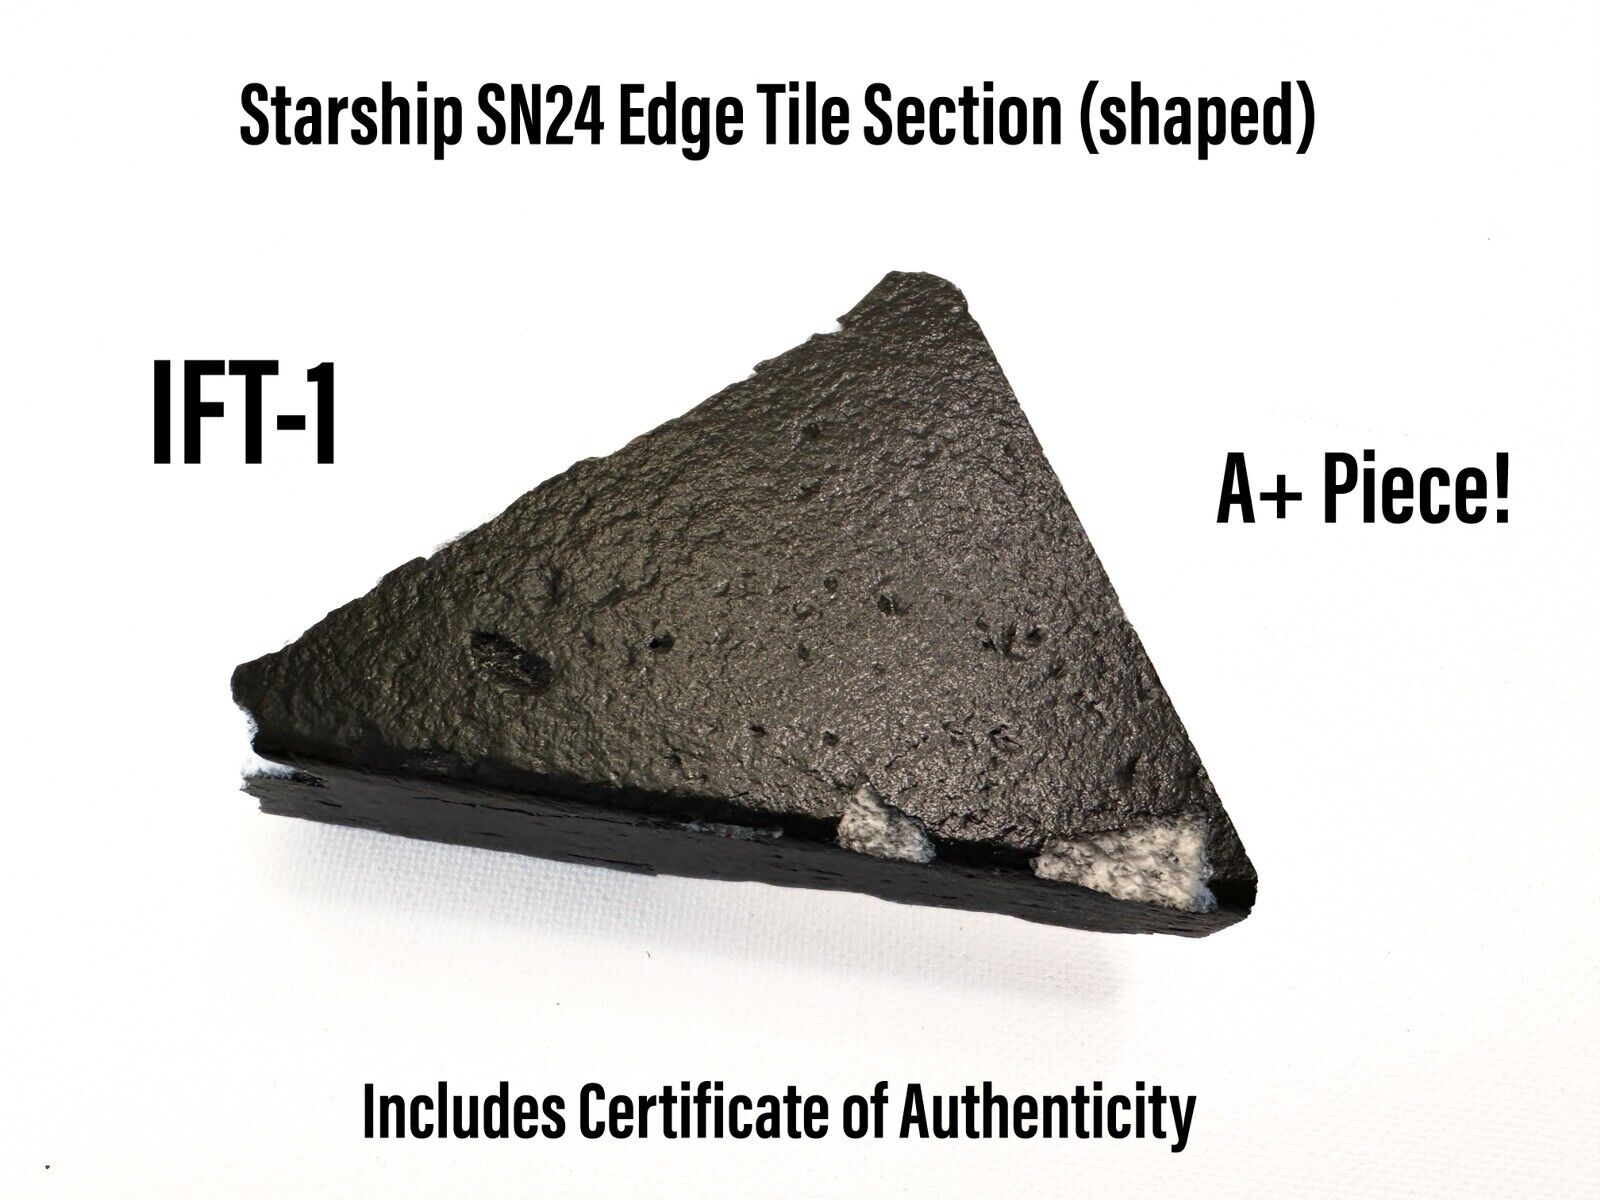 SpaceX Starship SN24 S24 Heat Shield Tile Edge Section (shaped) Flight 1 IFT-1